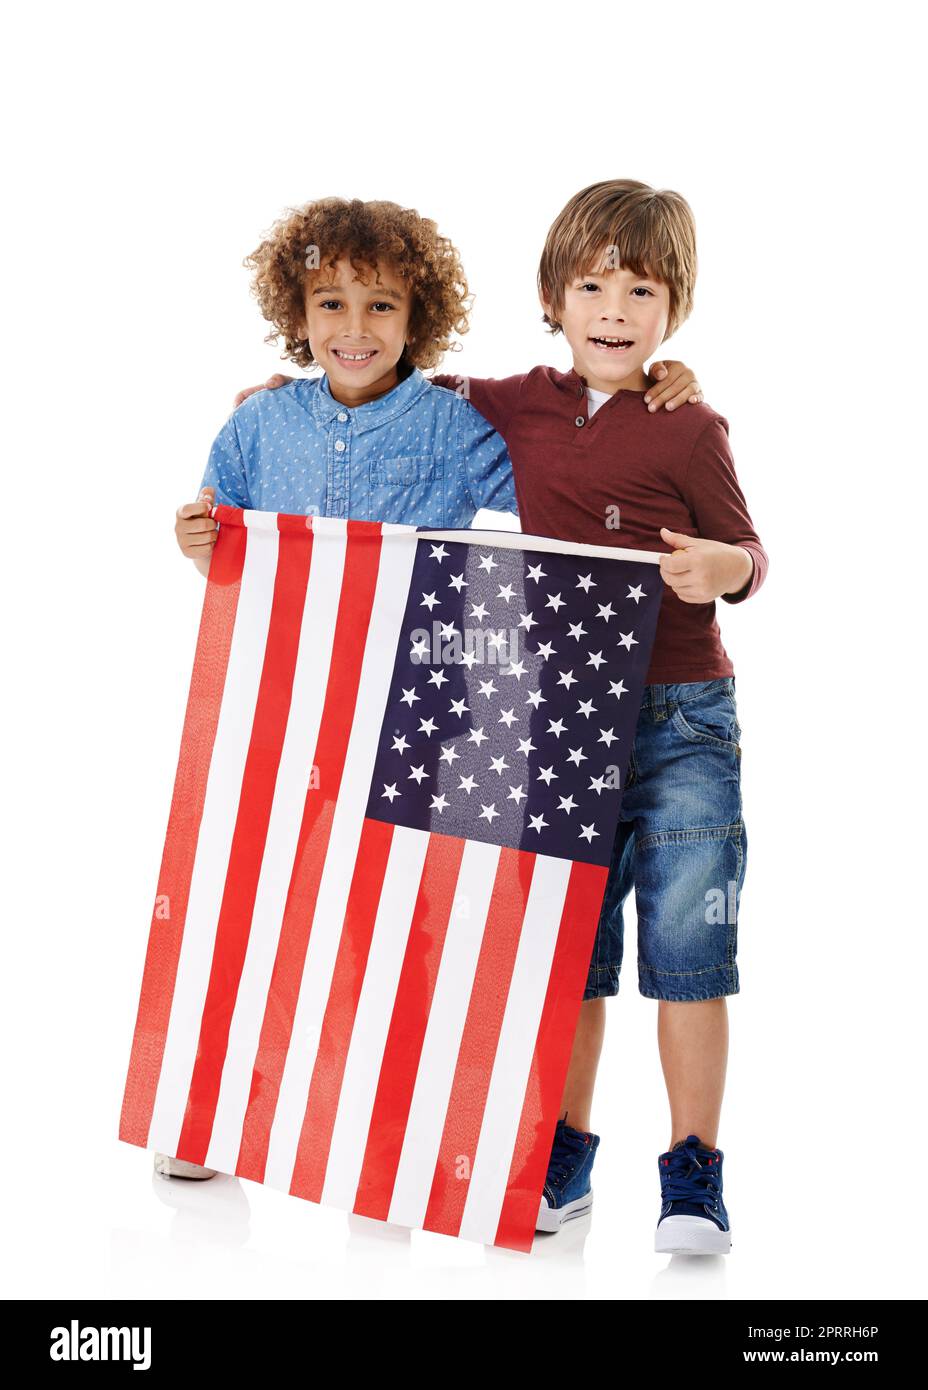 Proud to be American. Studio shot of two cute little boys holding the American flag together against a white background. Stock Photo